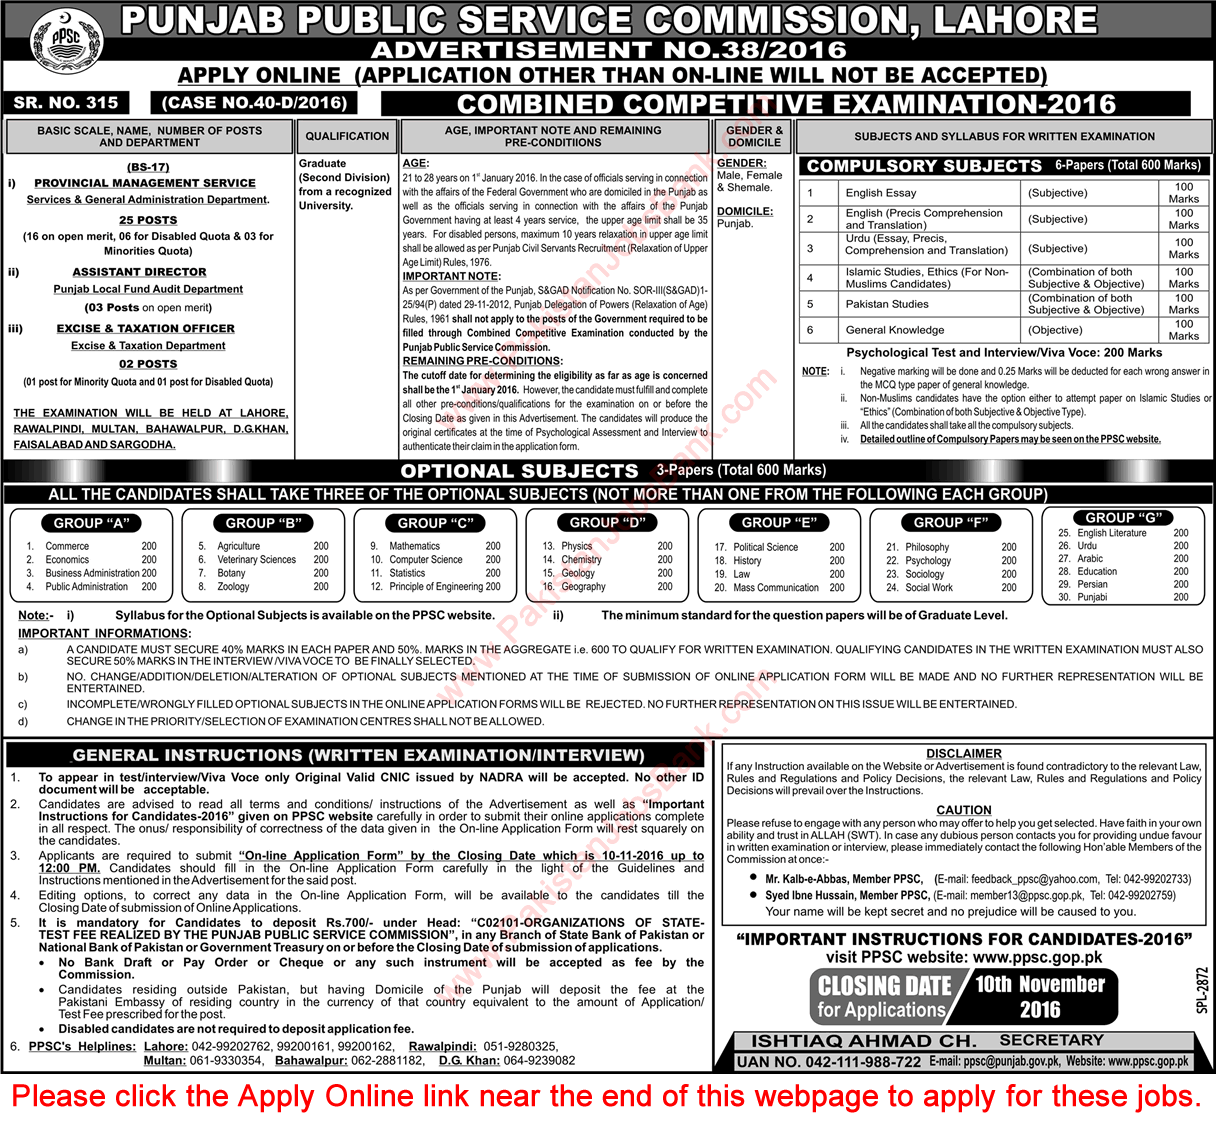 PPSC Combined Competitive Examination 2016 October Jobs Apply Online Advertisement No.38/2016 Latest